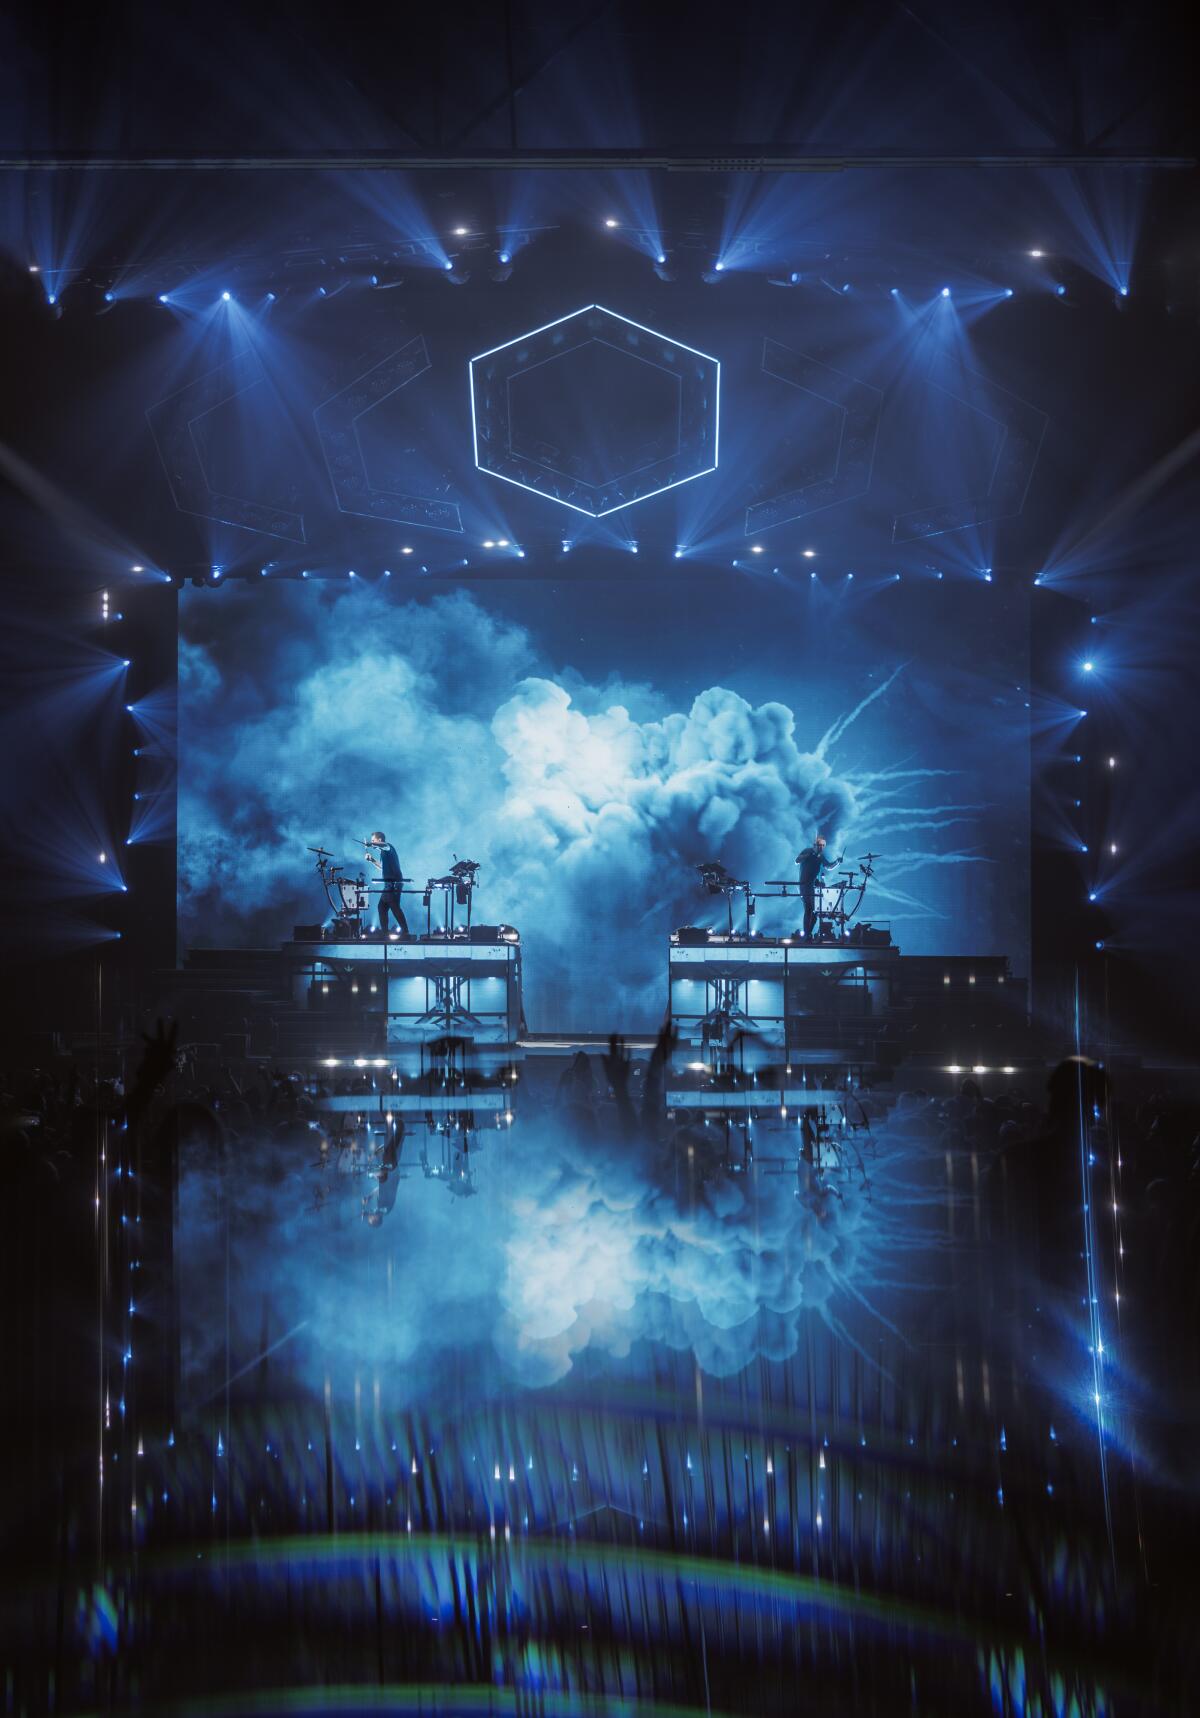 Odesza performing on big stage surrounded by blue light